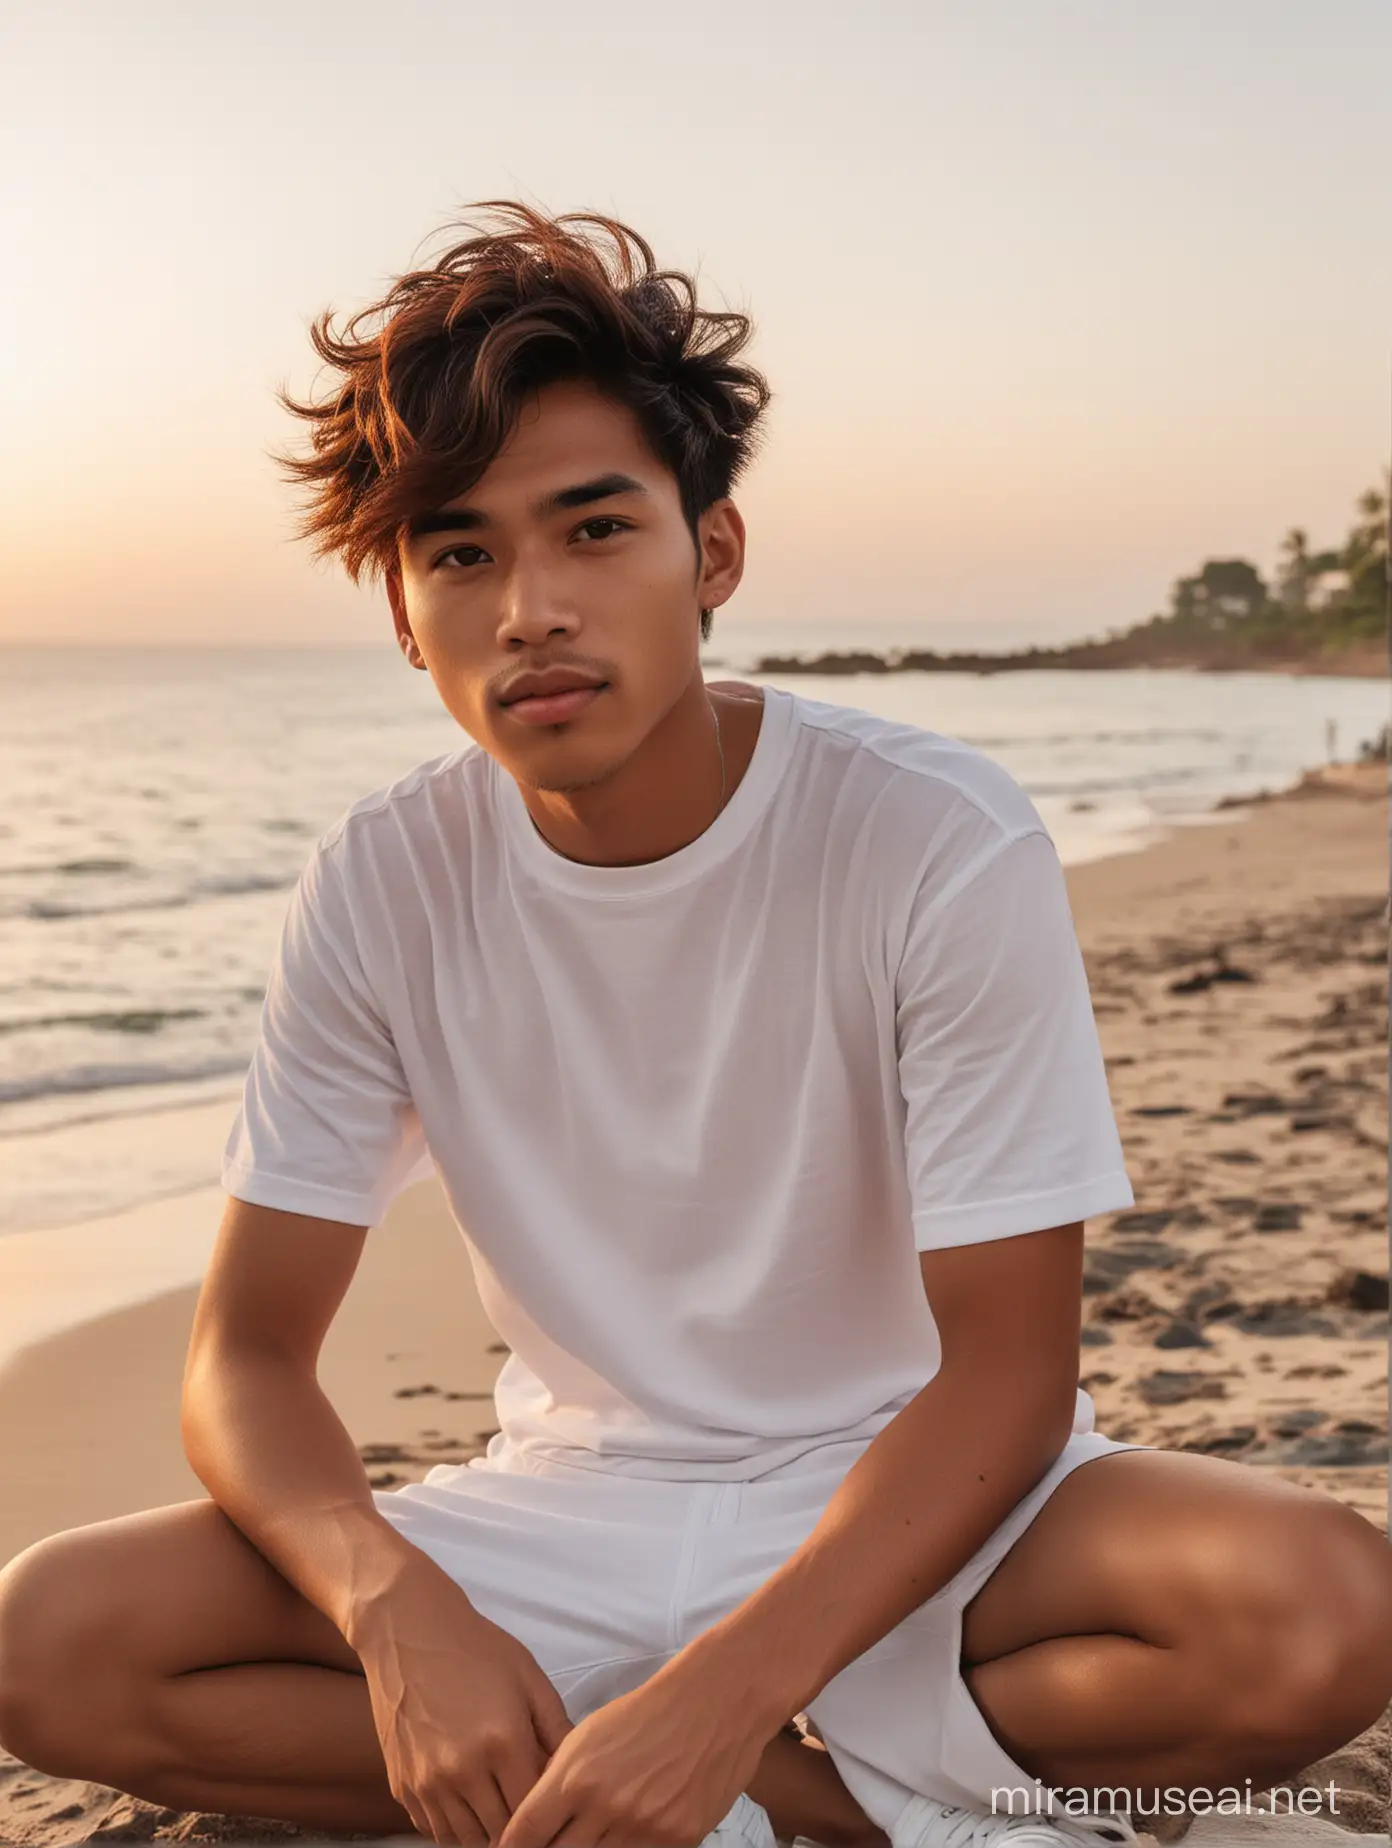 Young Indonesian Man Relaxing by the Beach at Sunset